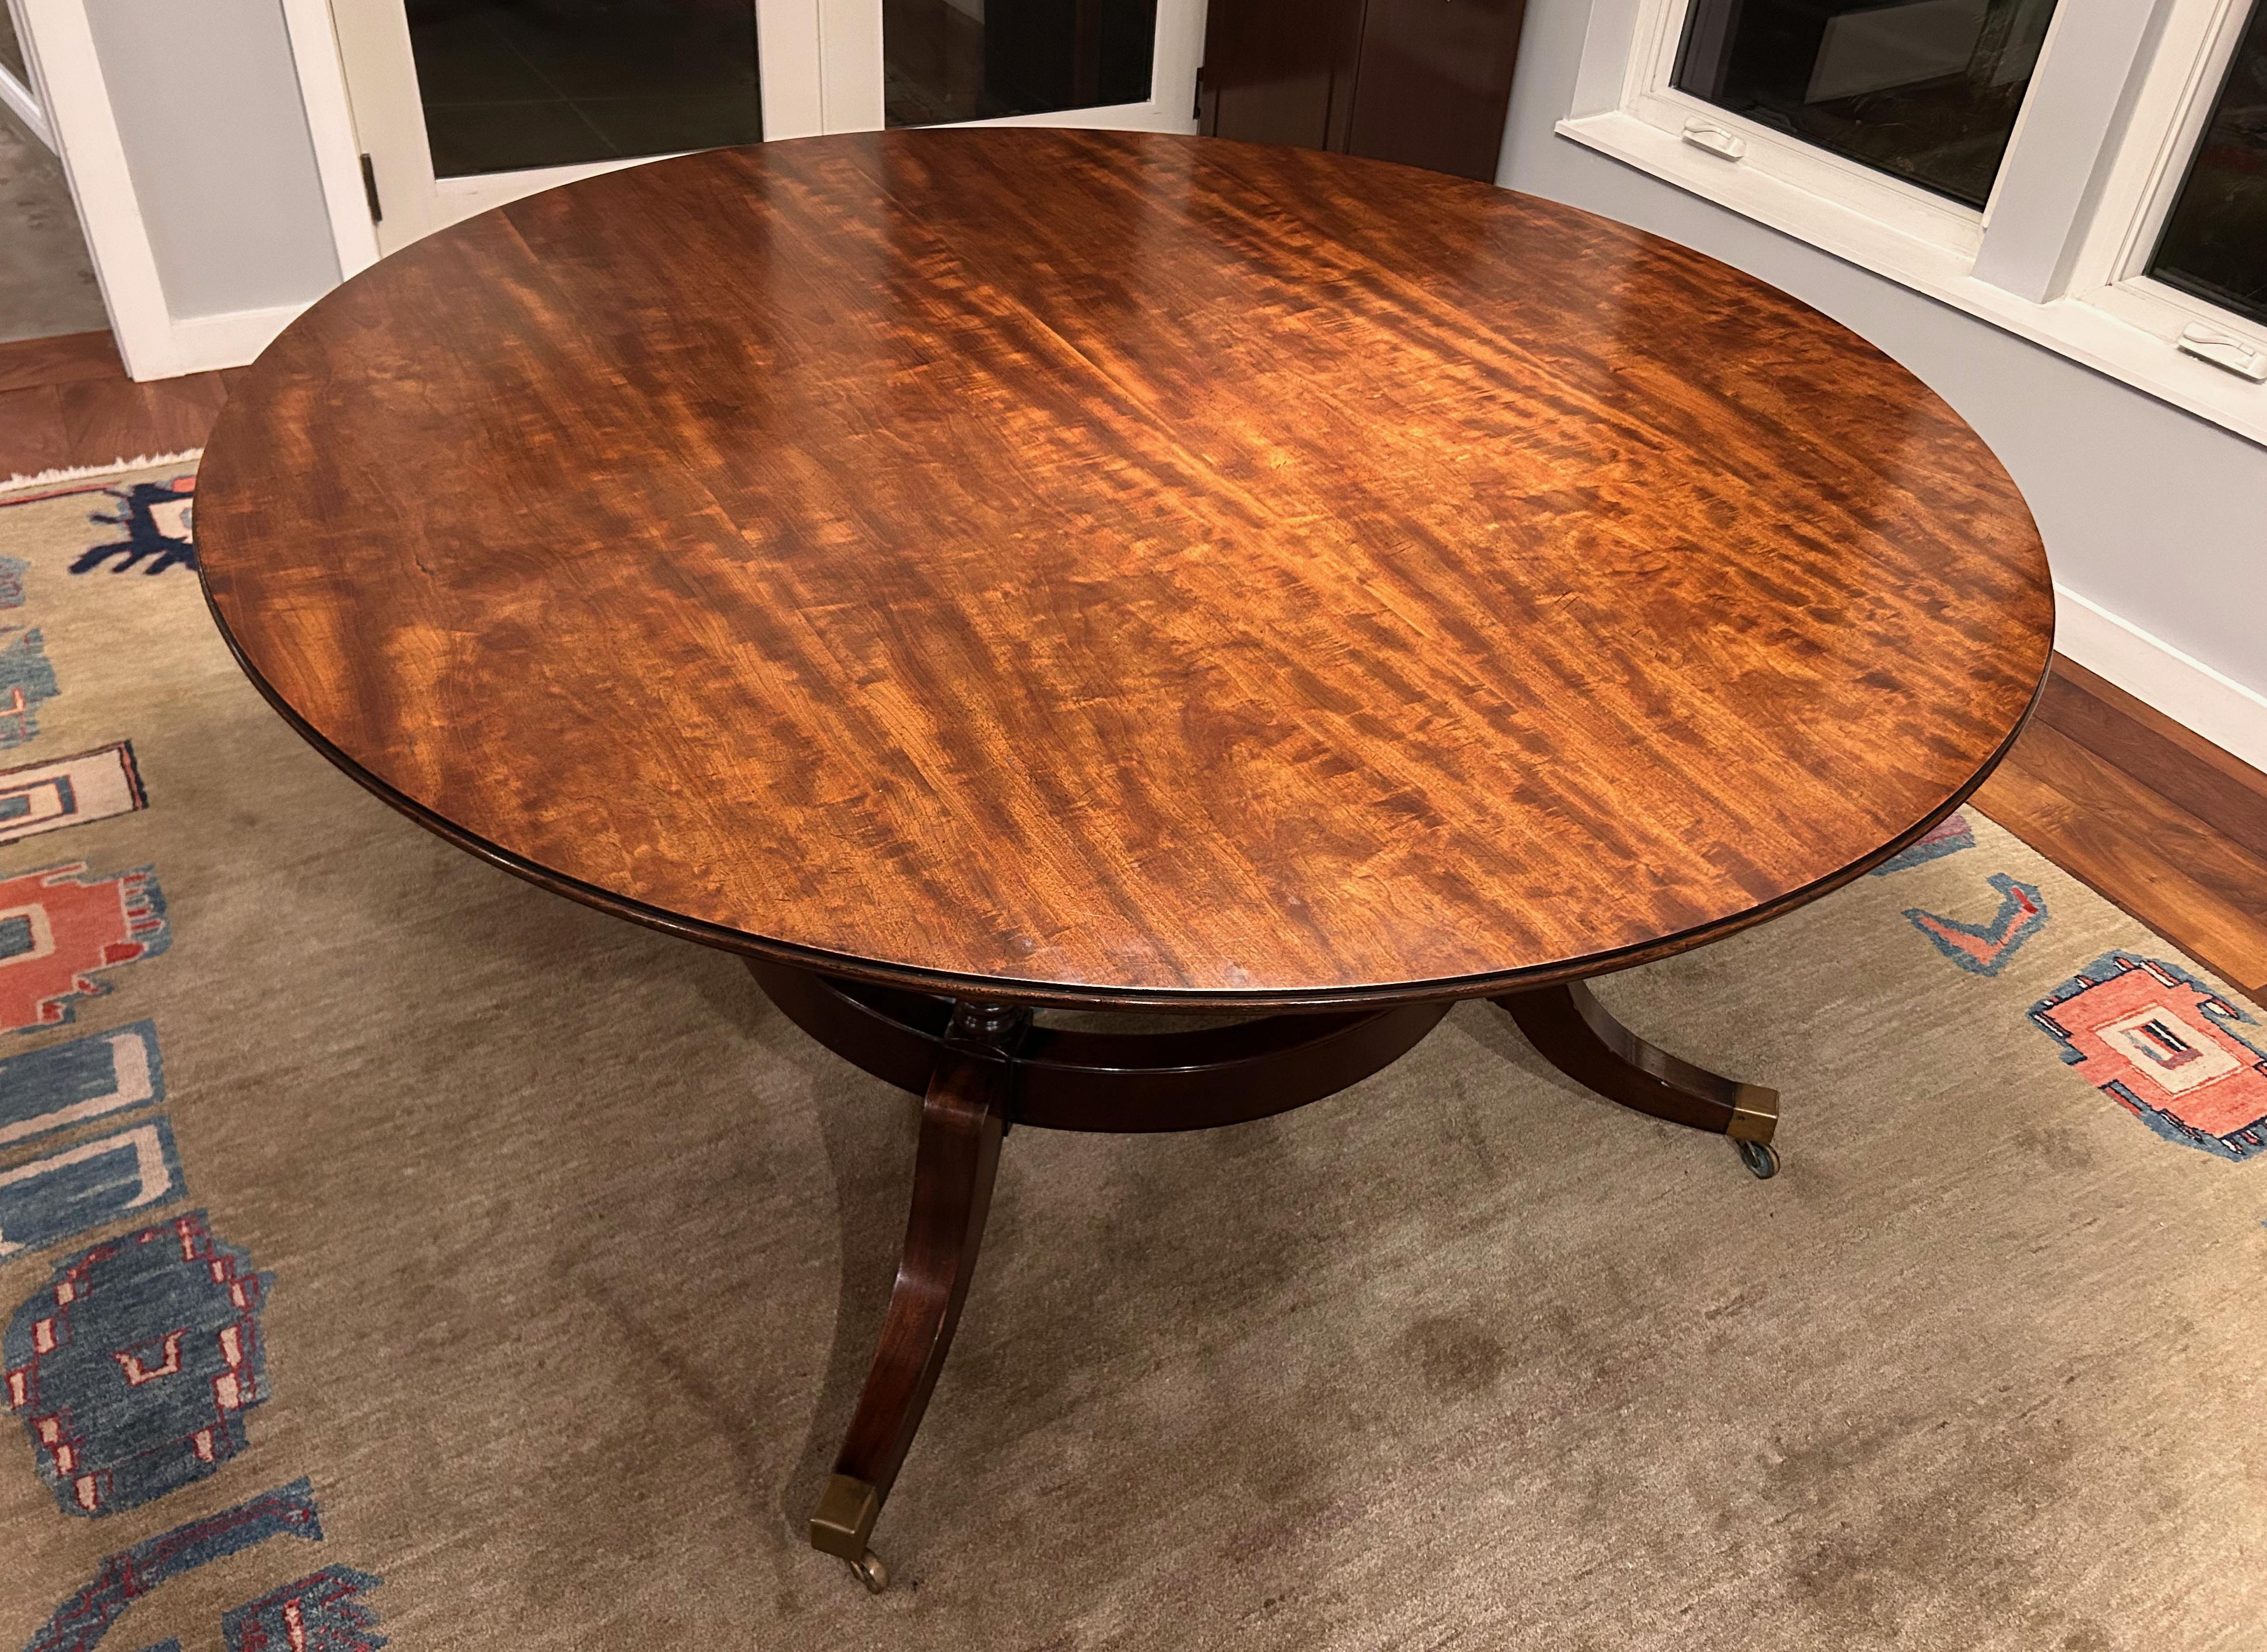 British 1940's Round Mahogany Veneer Dining Table with Crescent Leaves and Leaf Cabinet For Sale